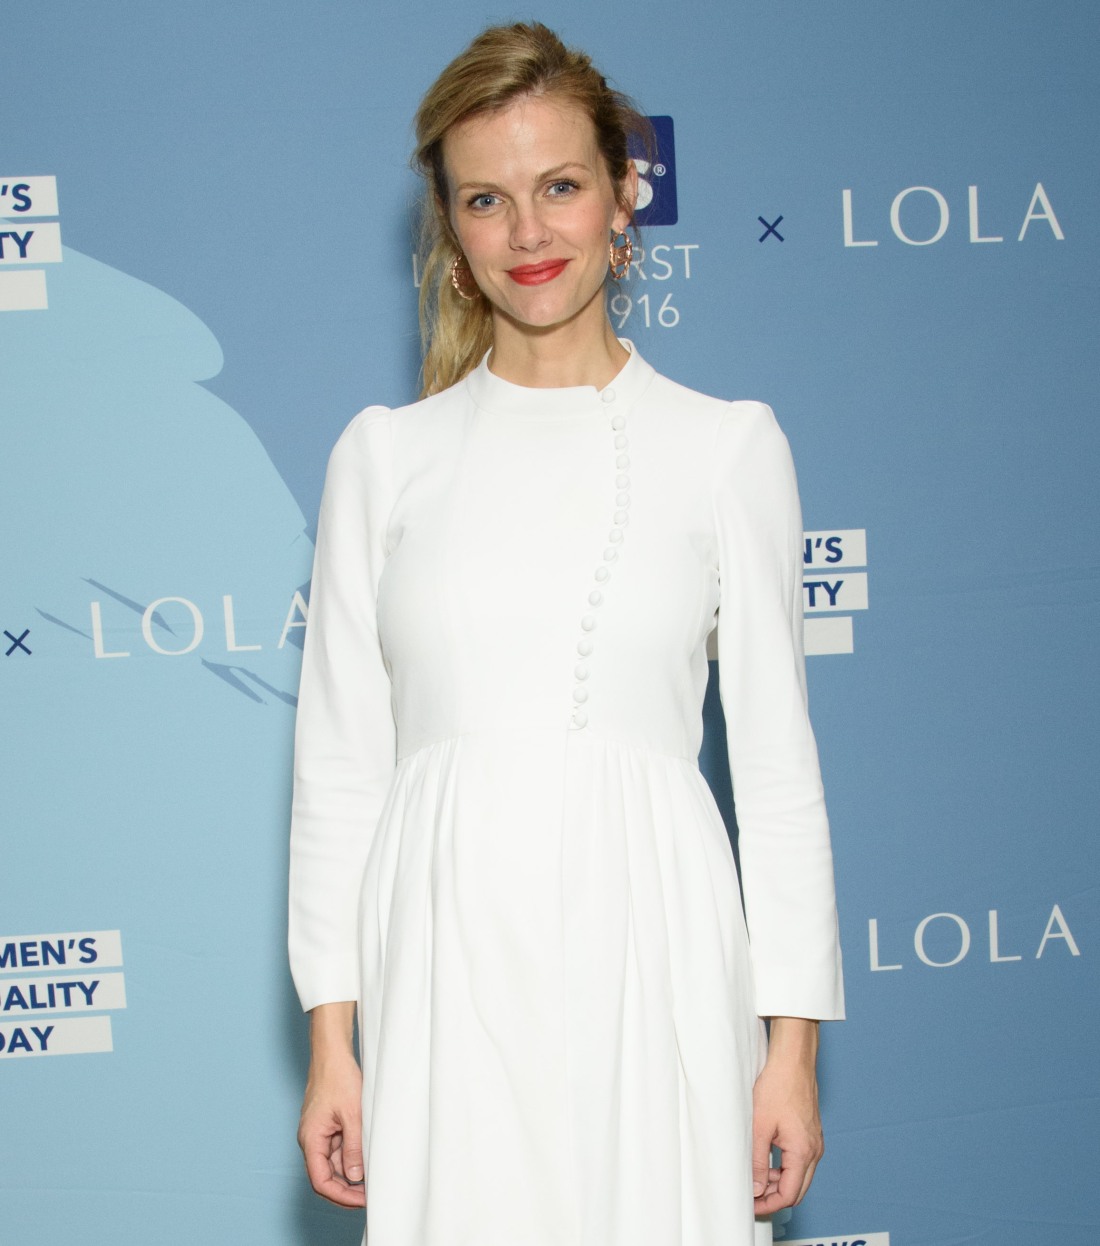 Keds Womens Equality Day Event